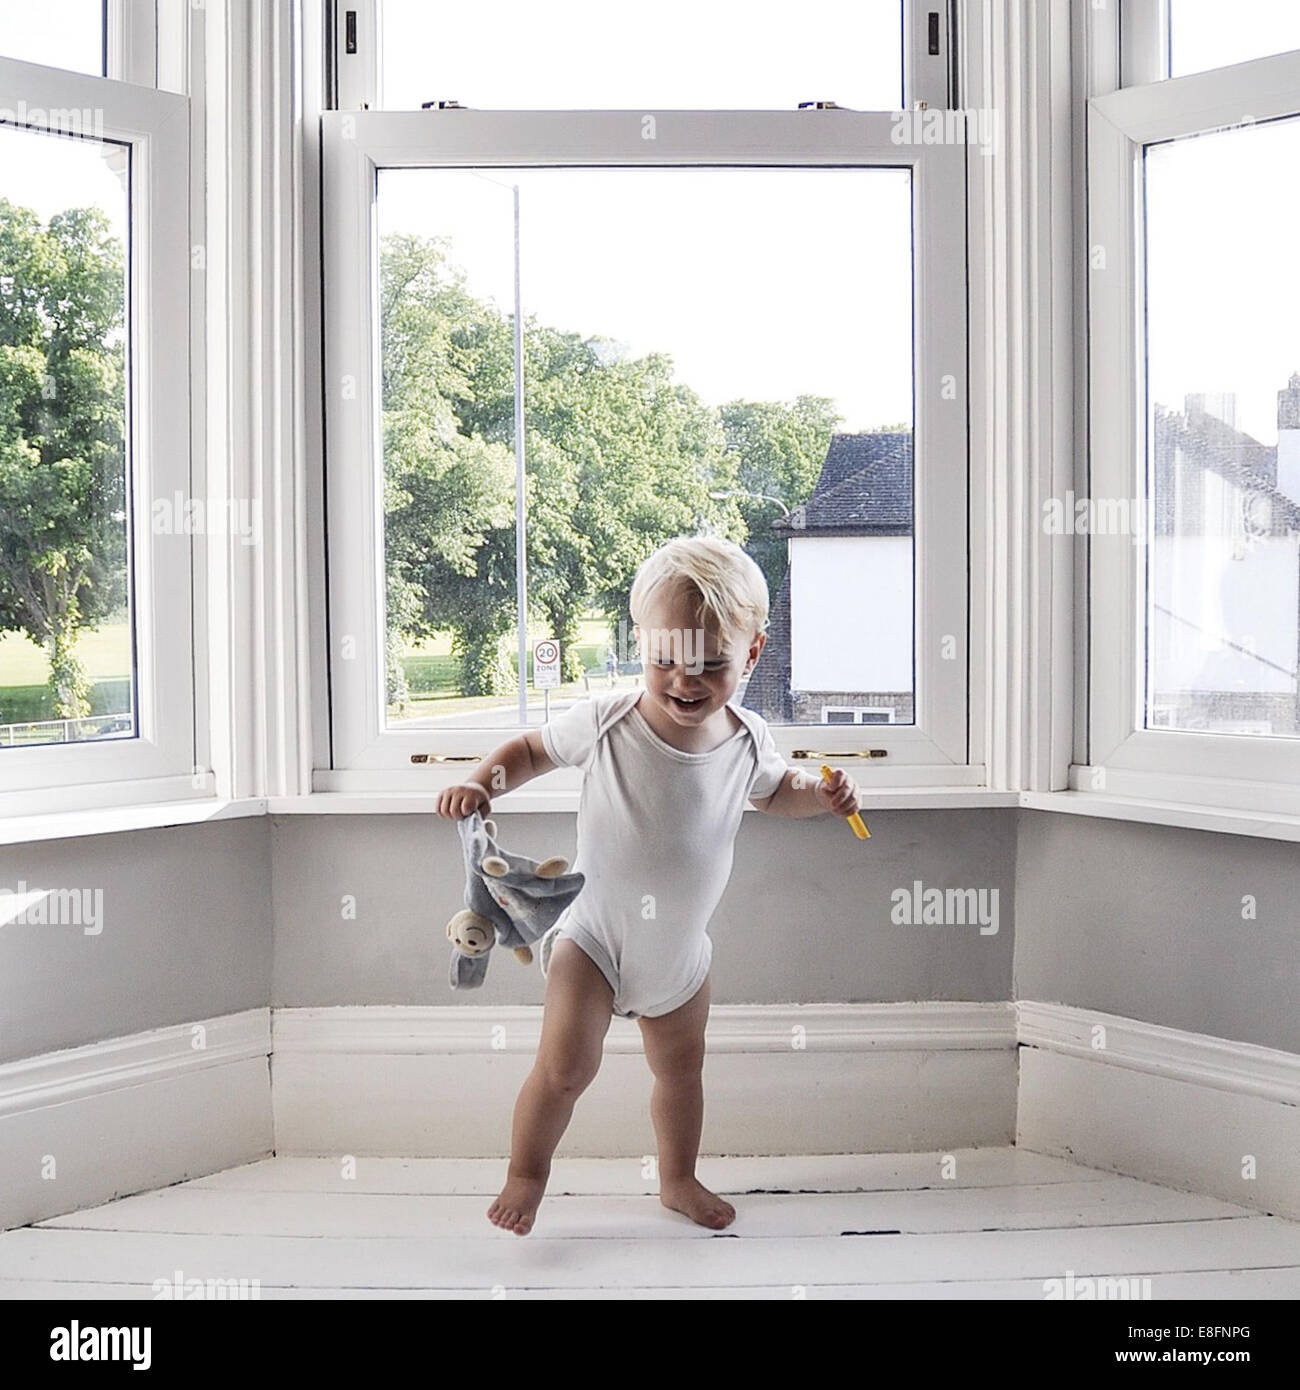 Boy dancing in living room holding toy Stock Photo